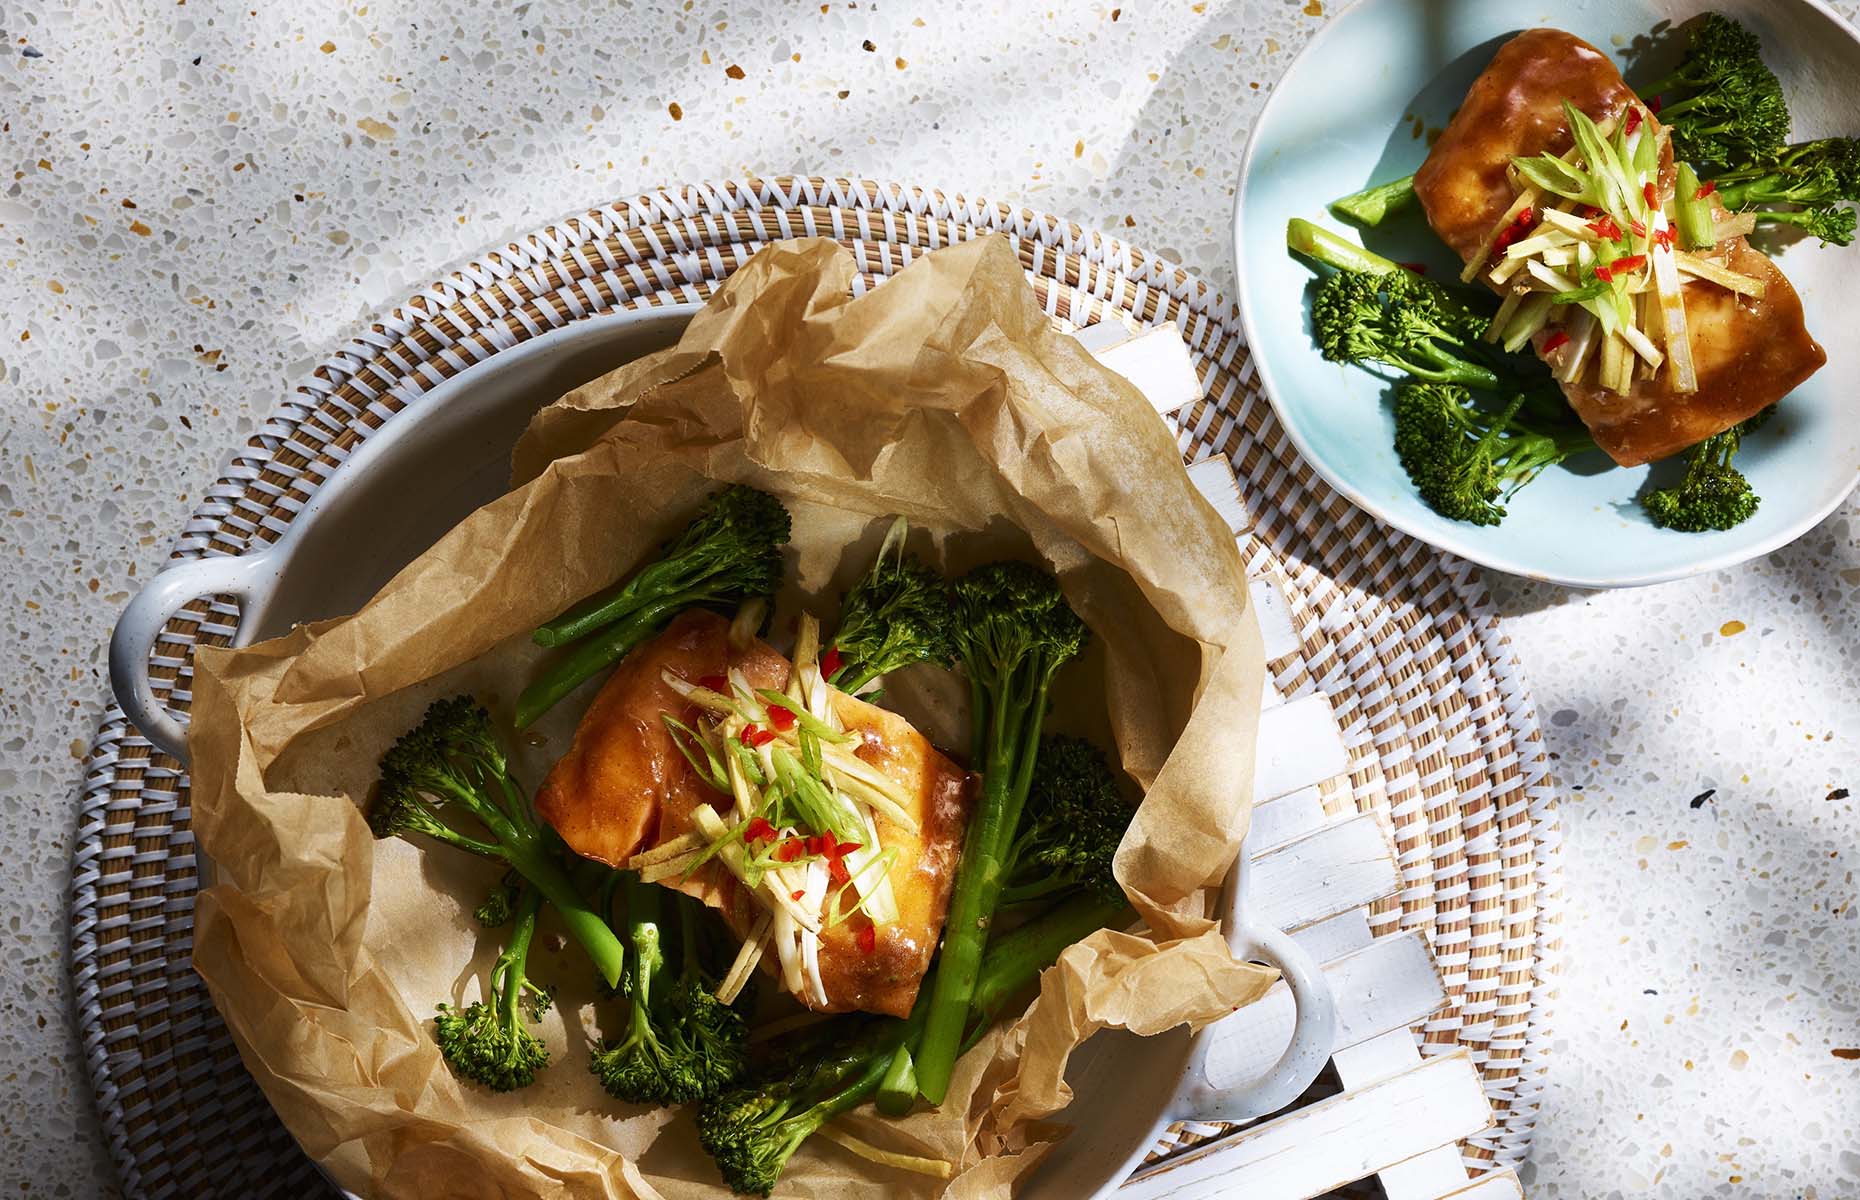 Ginger salmon with oyster sauce and broccoli